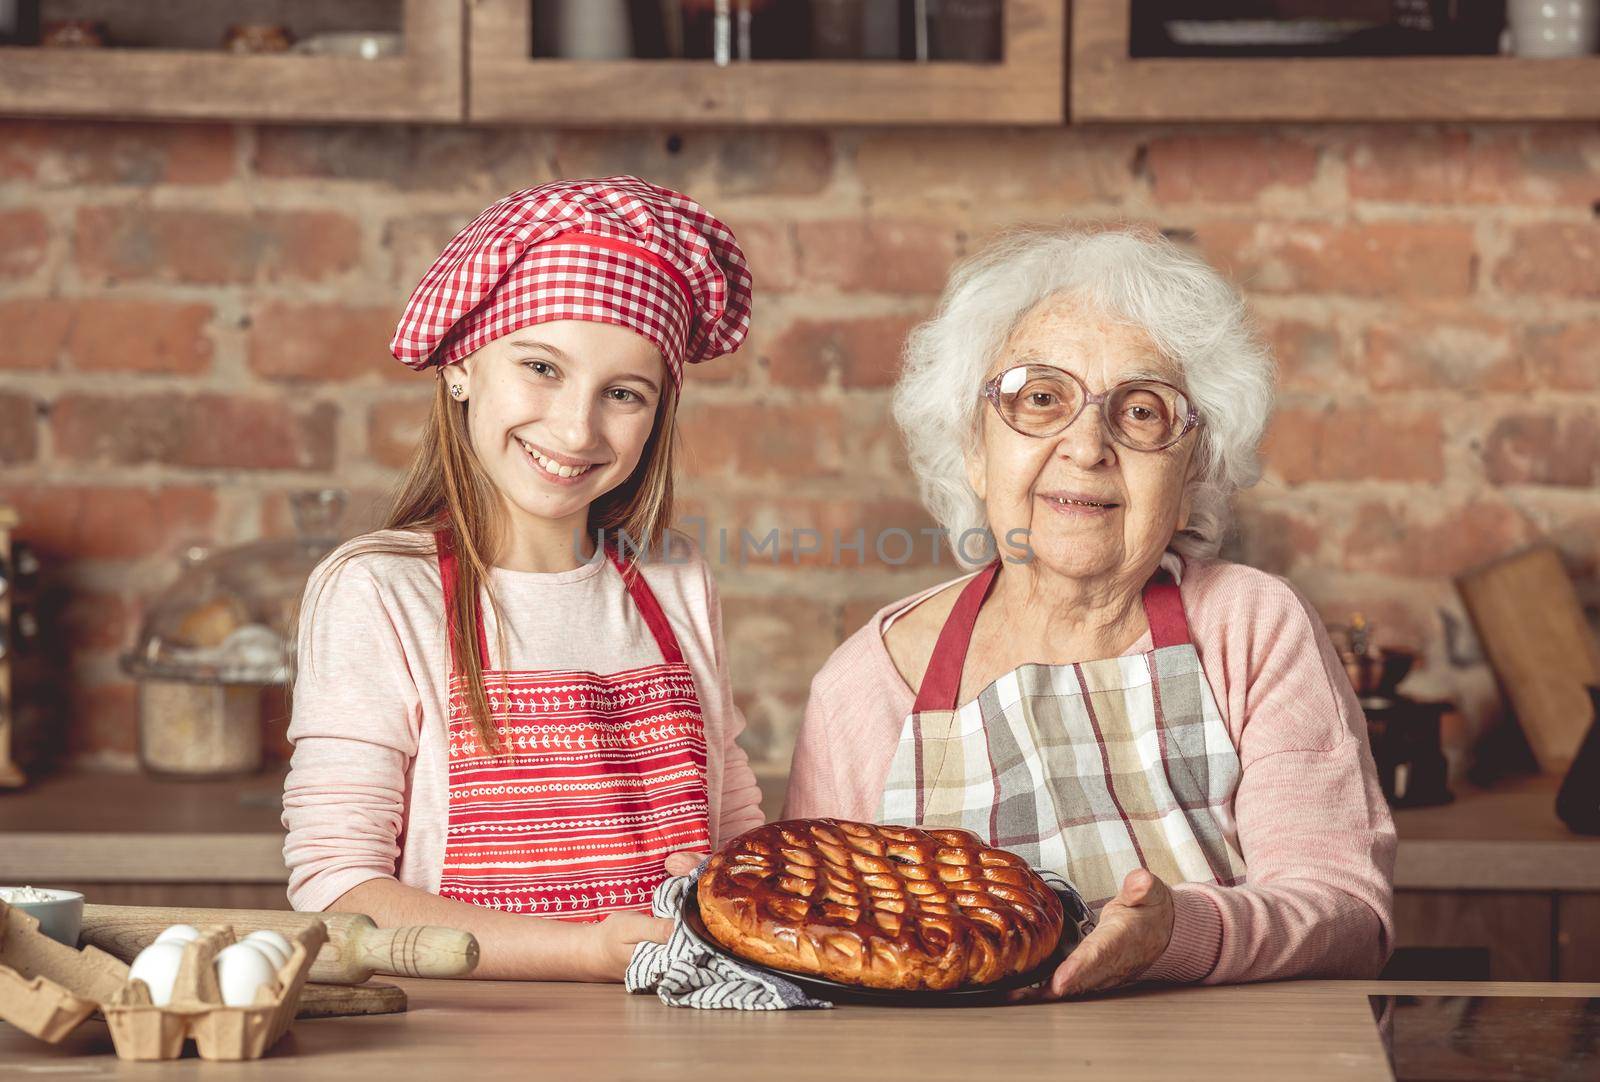 Young little granddaughter with her granny holding a tray and showing homemade fruit pie that they baked together